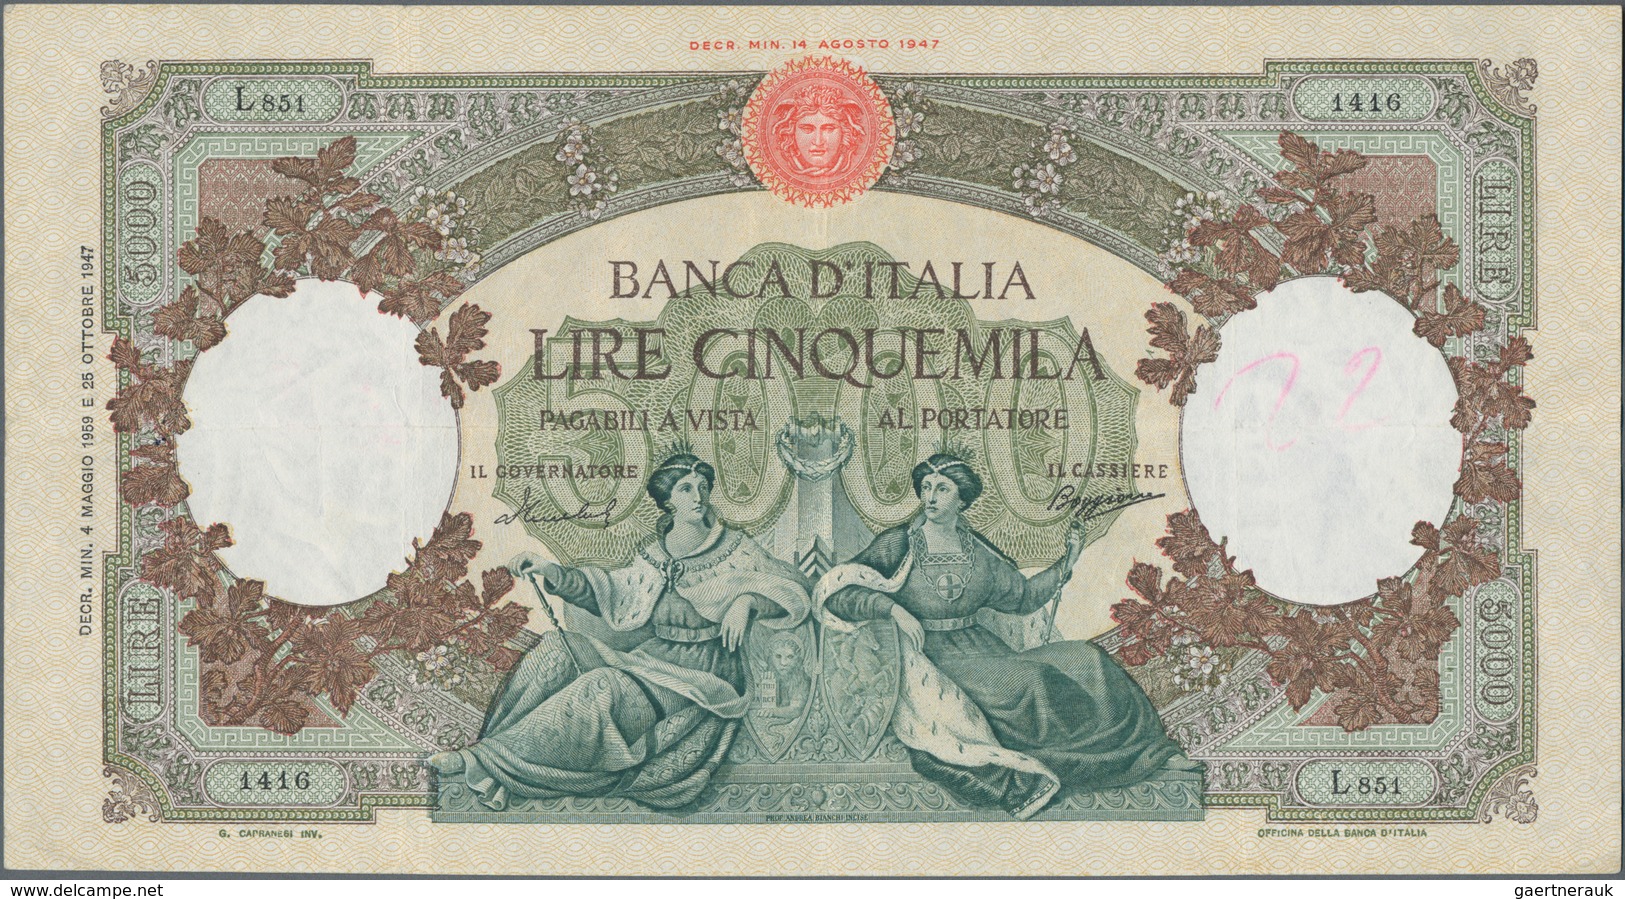 Italy / Italien: Huge album with 156 banknotes Italy, comprising for example 5 and 10 Lire Biglietti